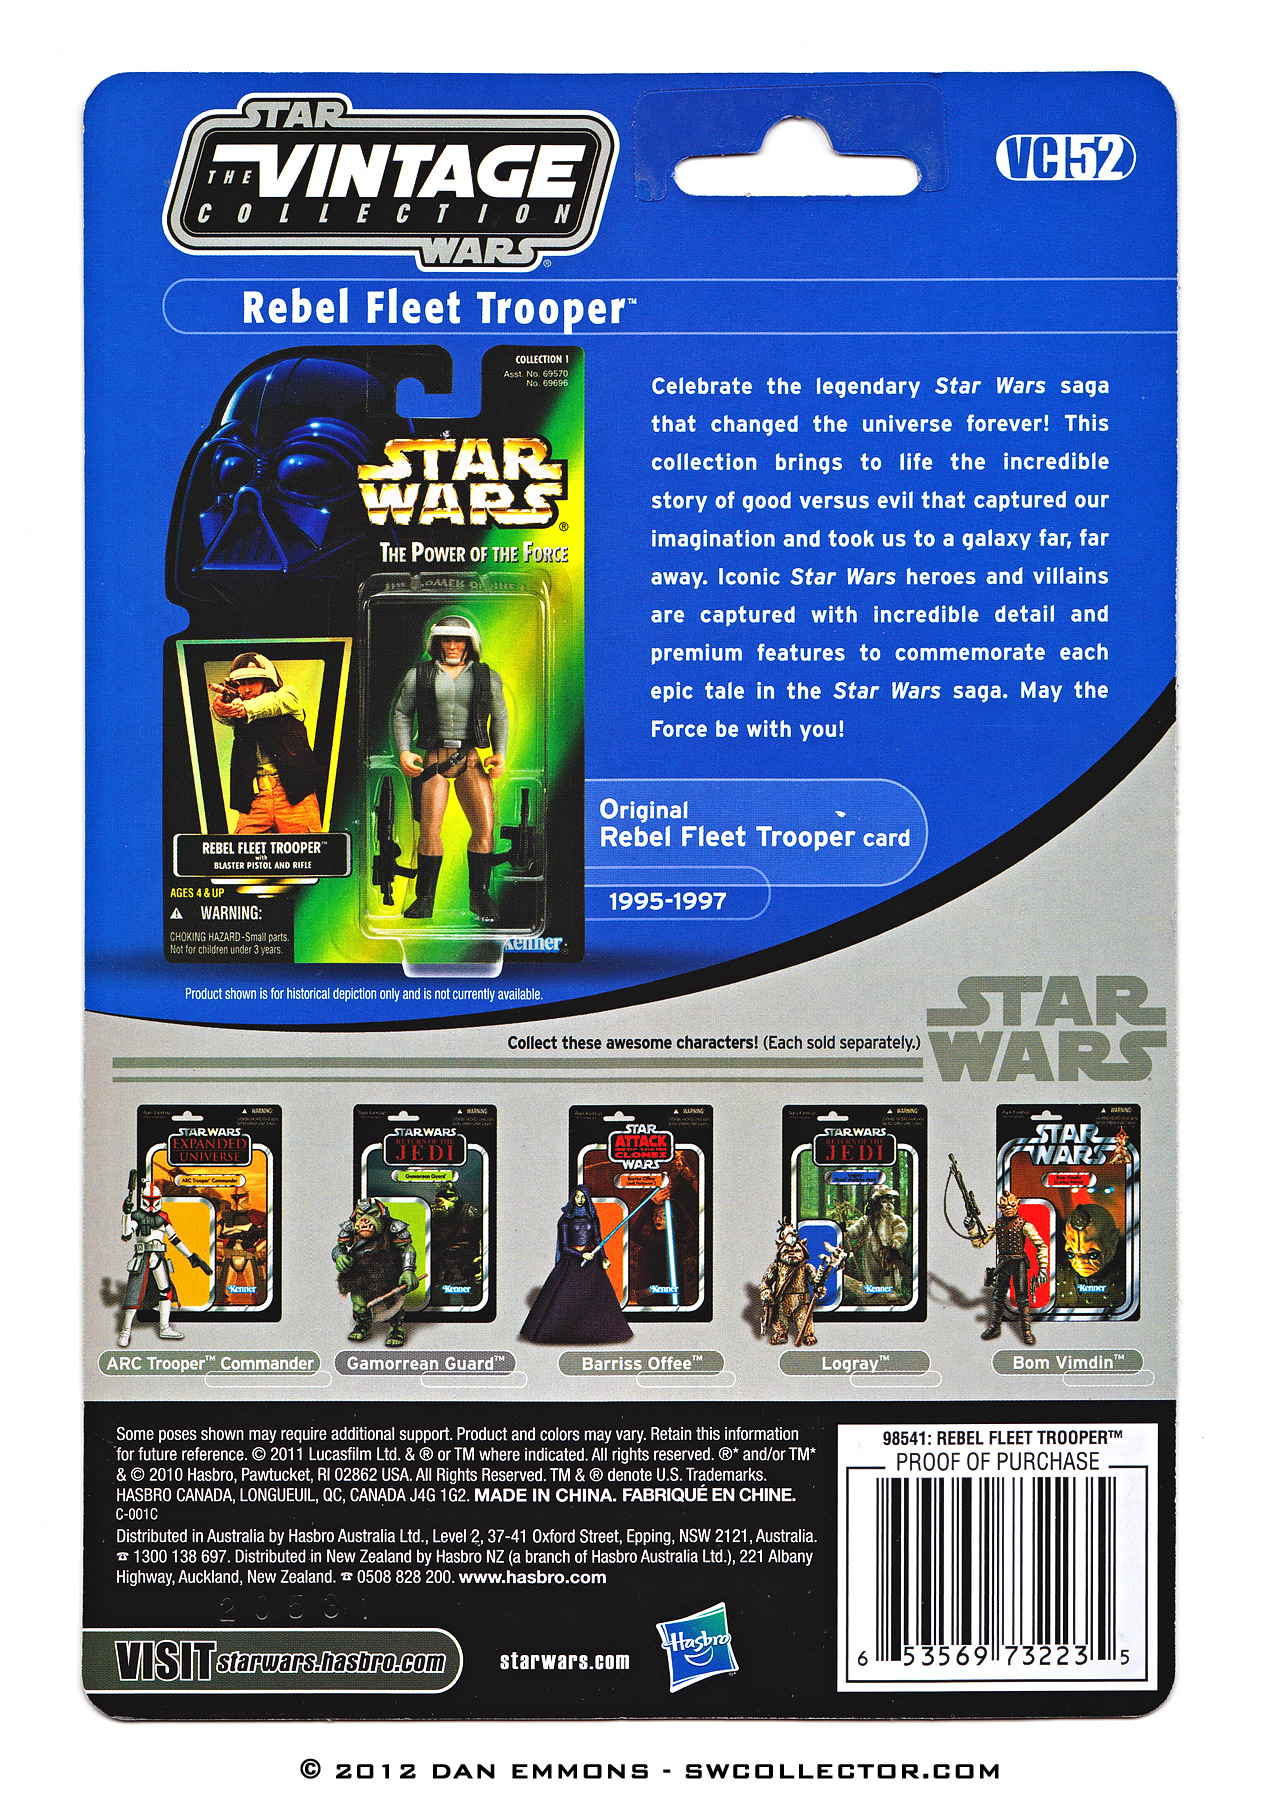 The Vintage Collection - VC52: Rebel Fleet Trooper - Variation - UPC Has Changed To 6 53569 73223 5